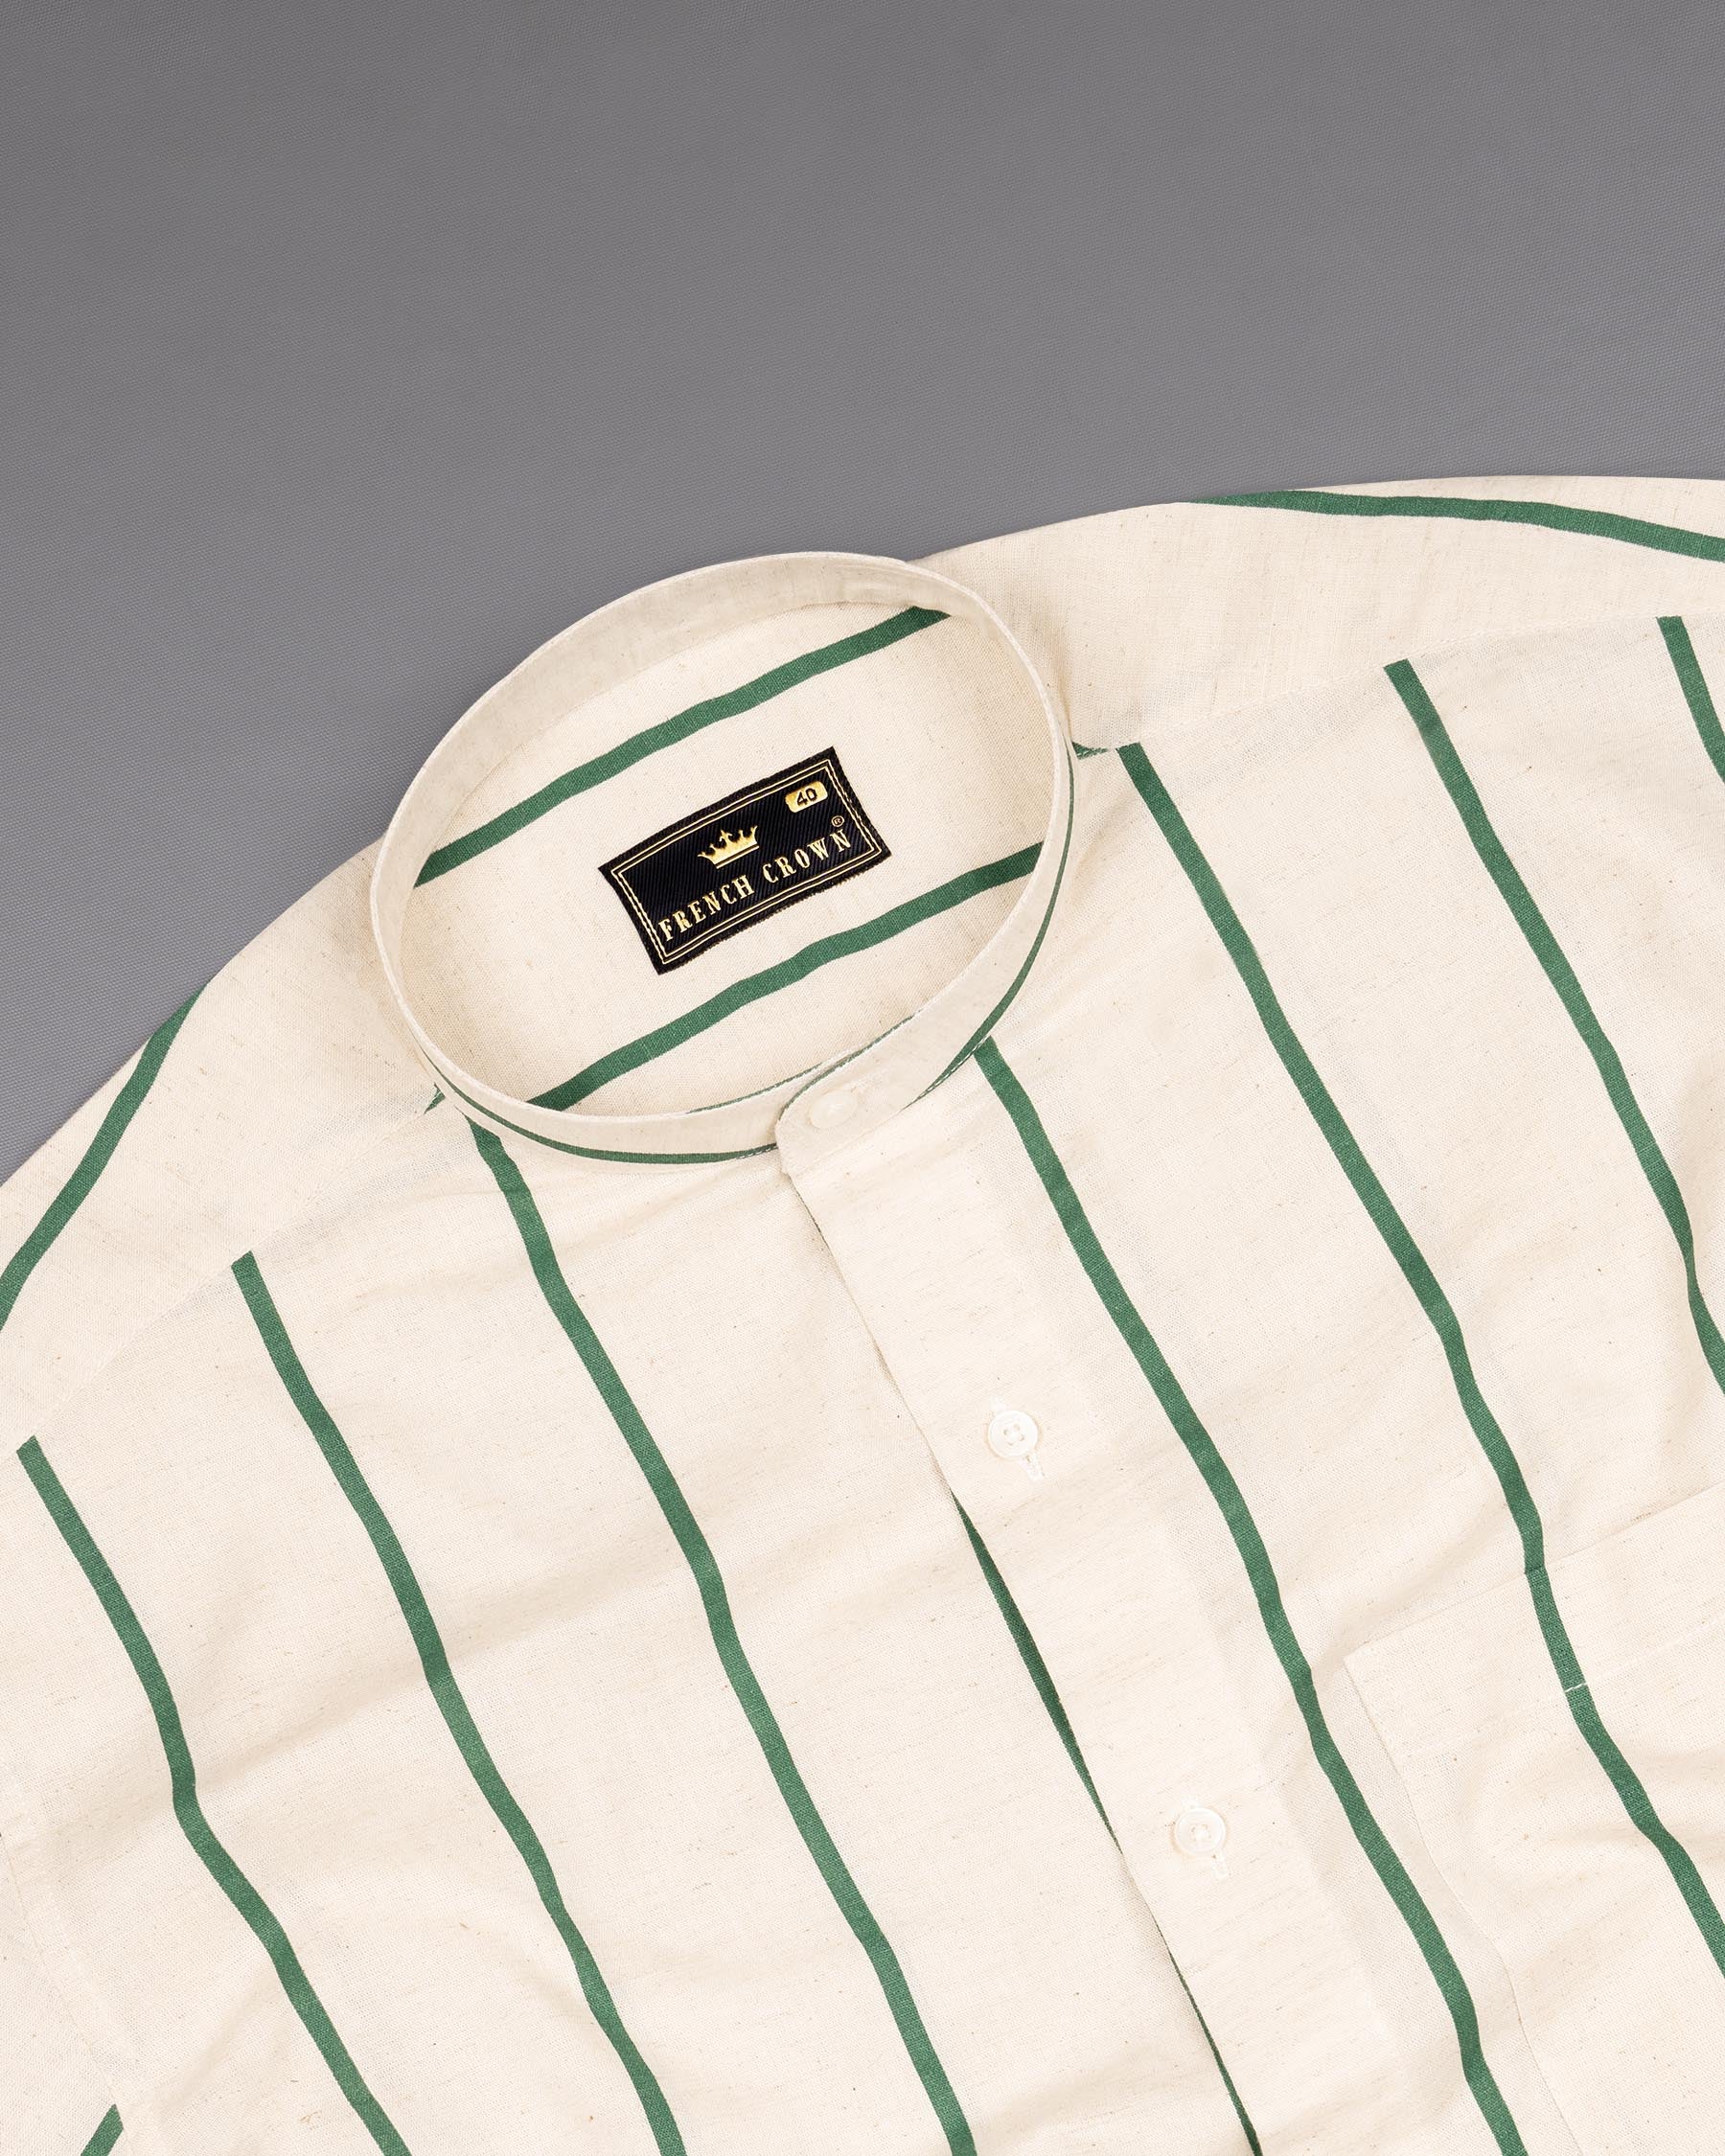 Ecru Brown with Oxley Green Striped Luxurious Linen Shirt 7010-M-38,7010-M-38,7010-M-39,7010-M-39,7010-M-40,7010-M-40,7010-M-42,7010-M-42,7010-M-44,7010-M-44,7010-M-46,7010-M-46,7010-M-48,7010-M-48,7010-M-50,7010-M-50,7010-M-52,7010-M-52